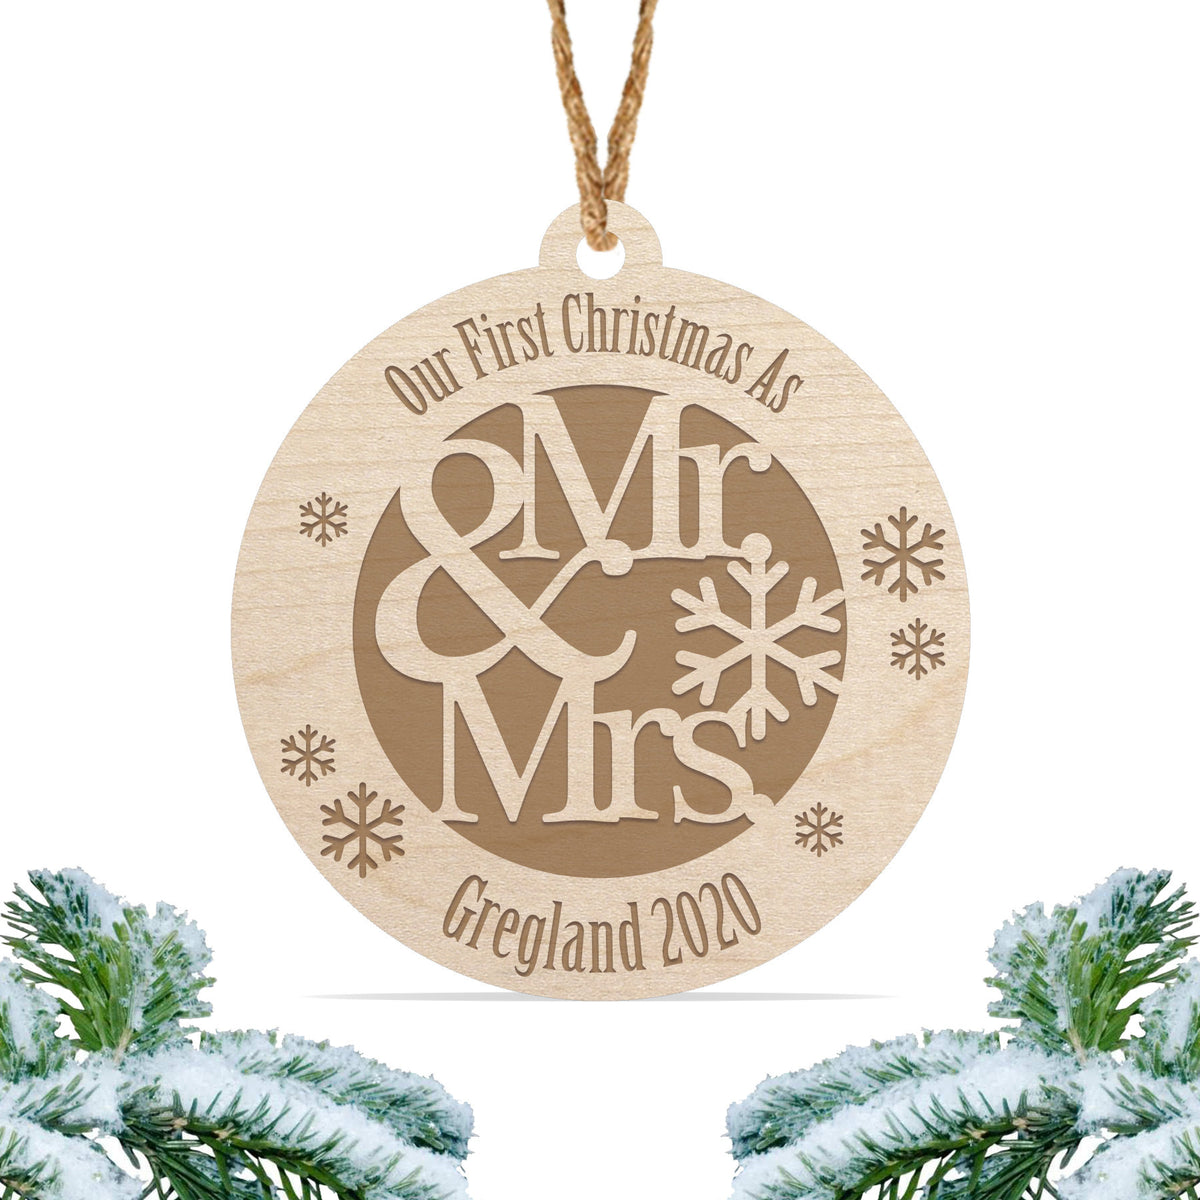 Our first Christmas as mr and mrs ornament, Personalized engraved wood Christmas ornament, First christmas ornament / Laser engraved - RCH Gifts